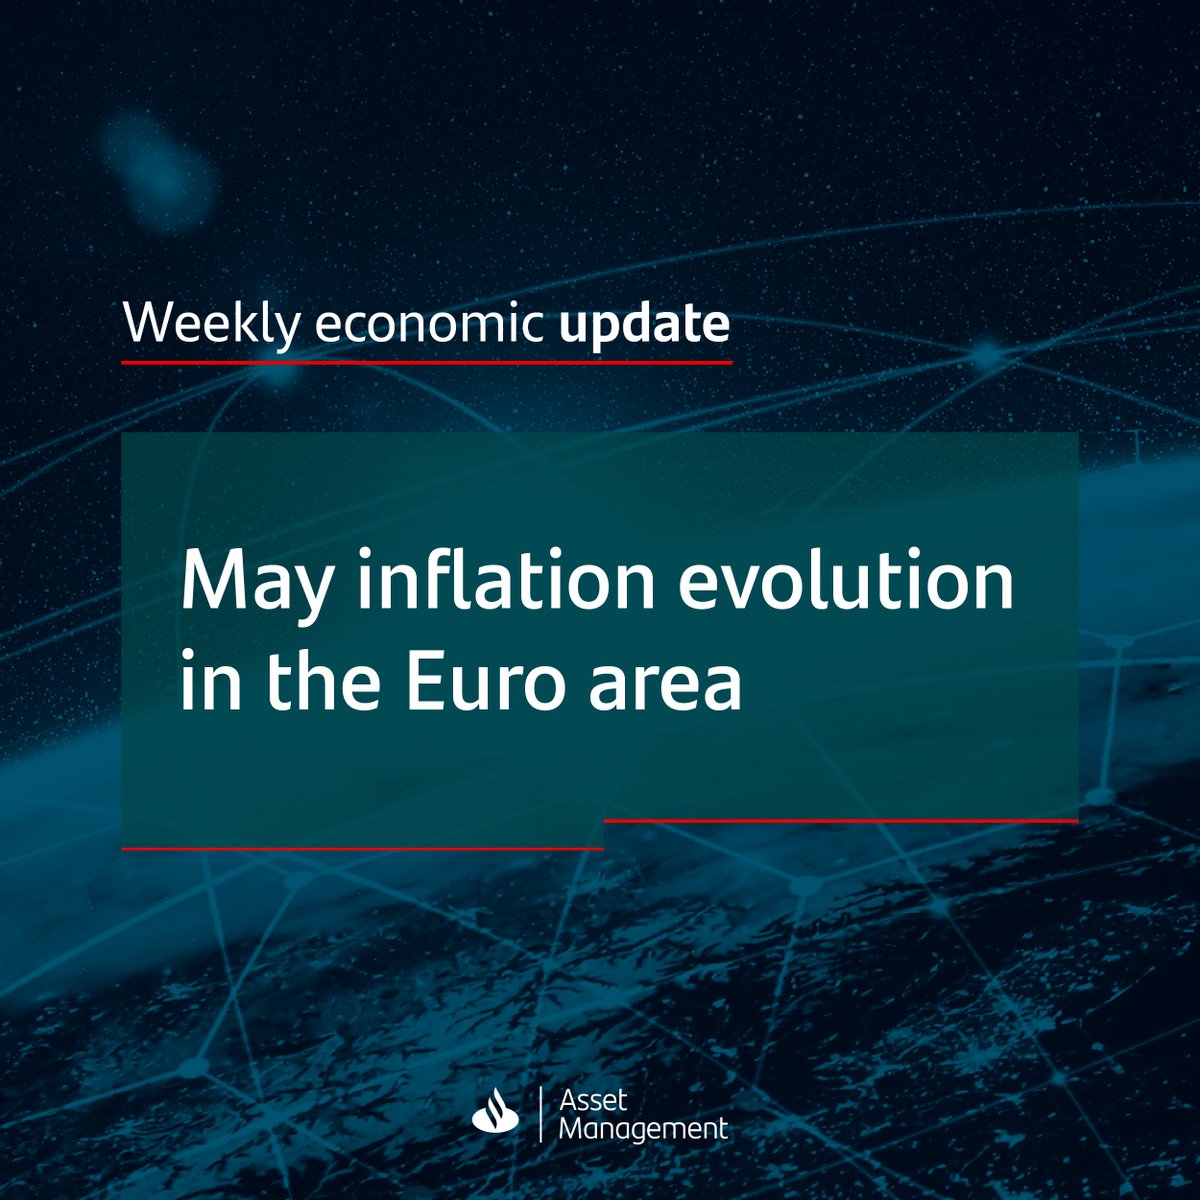 May inflation evolution in the Euro area and major countries were positive as inflation continued to ease.

#WeeklyEconomicUpdate